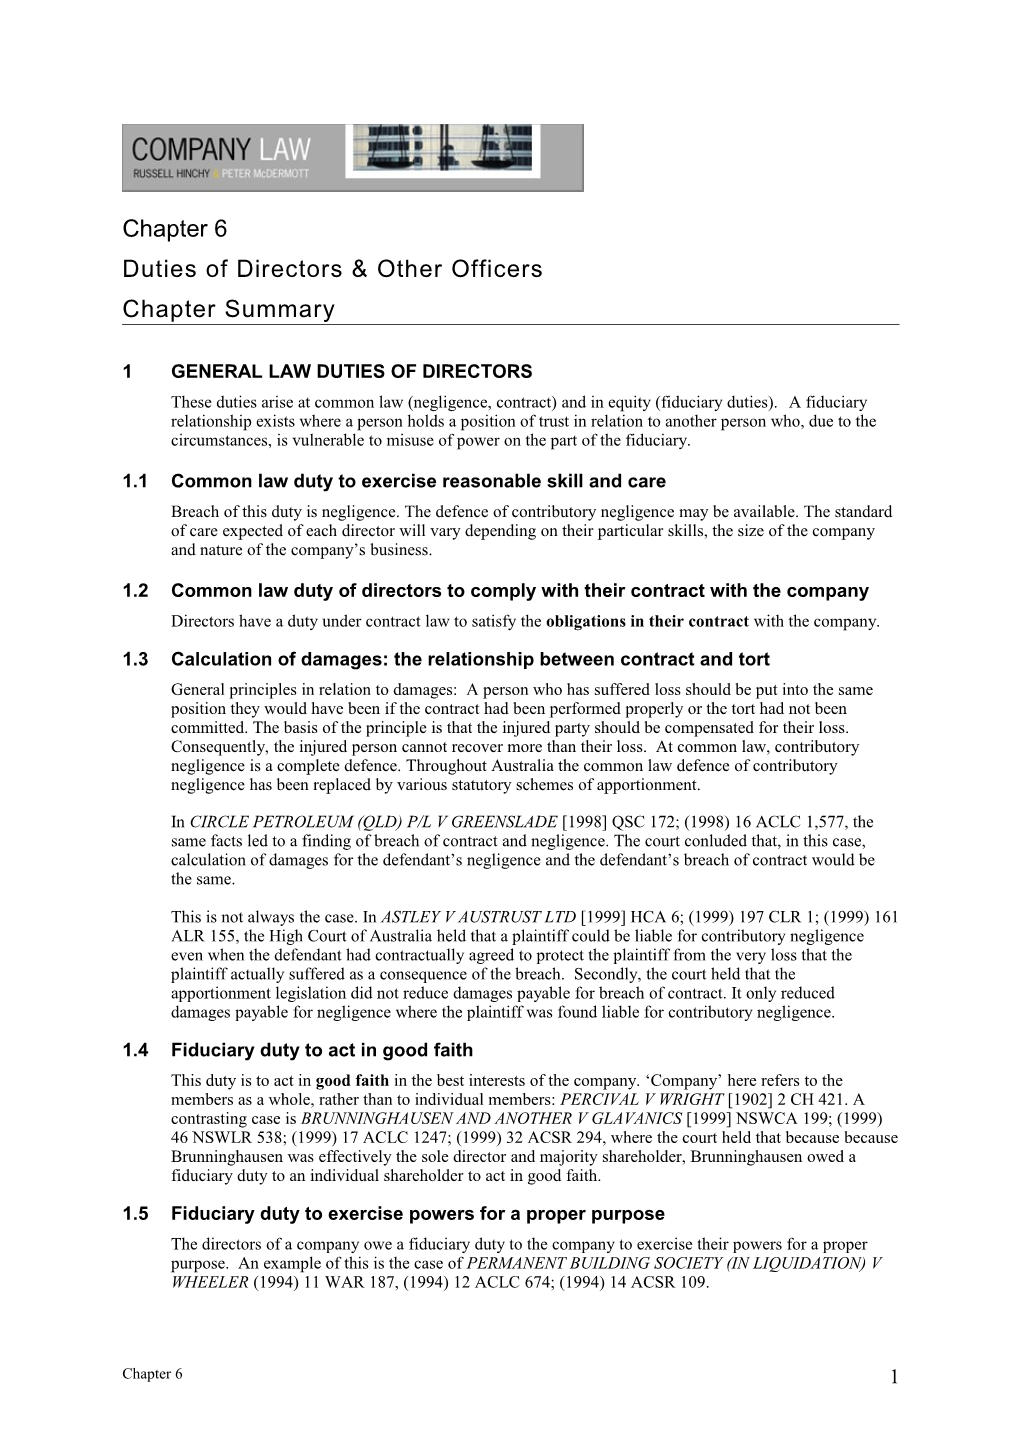 Duties of Directors & Other Officers